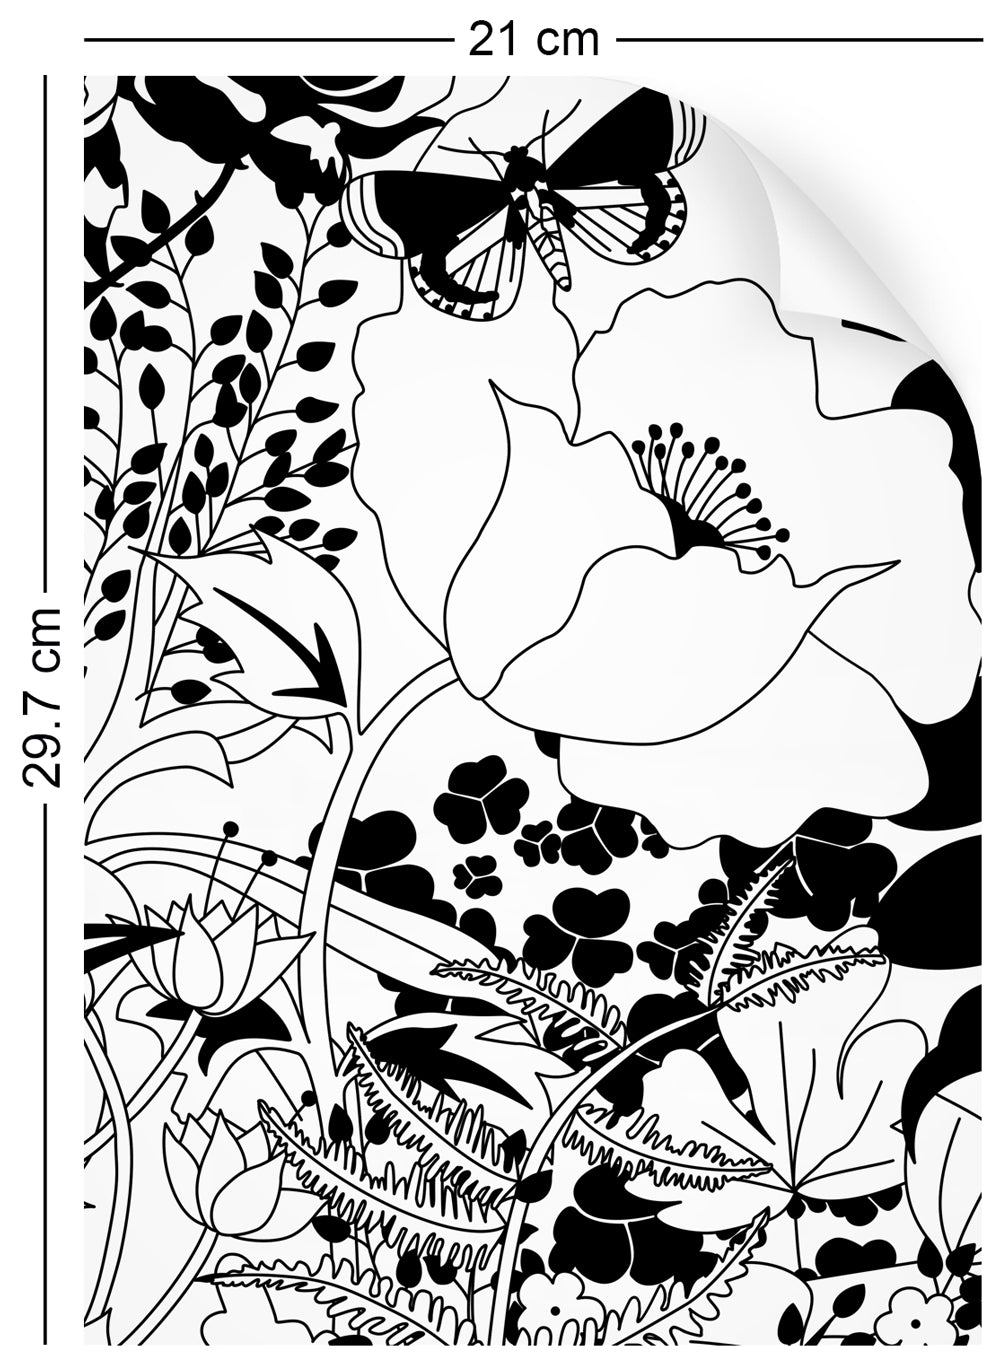 a4 wallpaper swatch with floral garden design in black and white